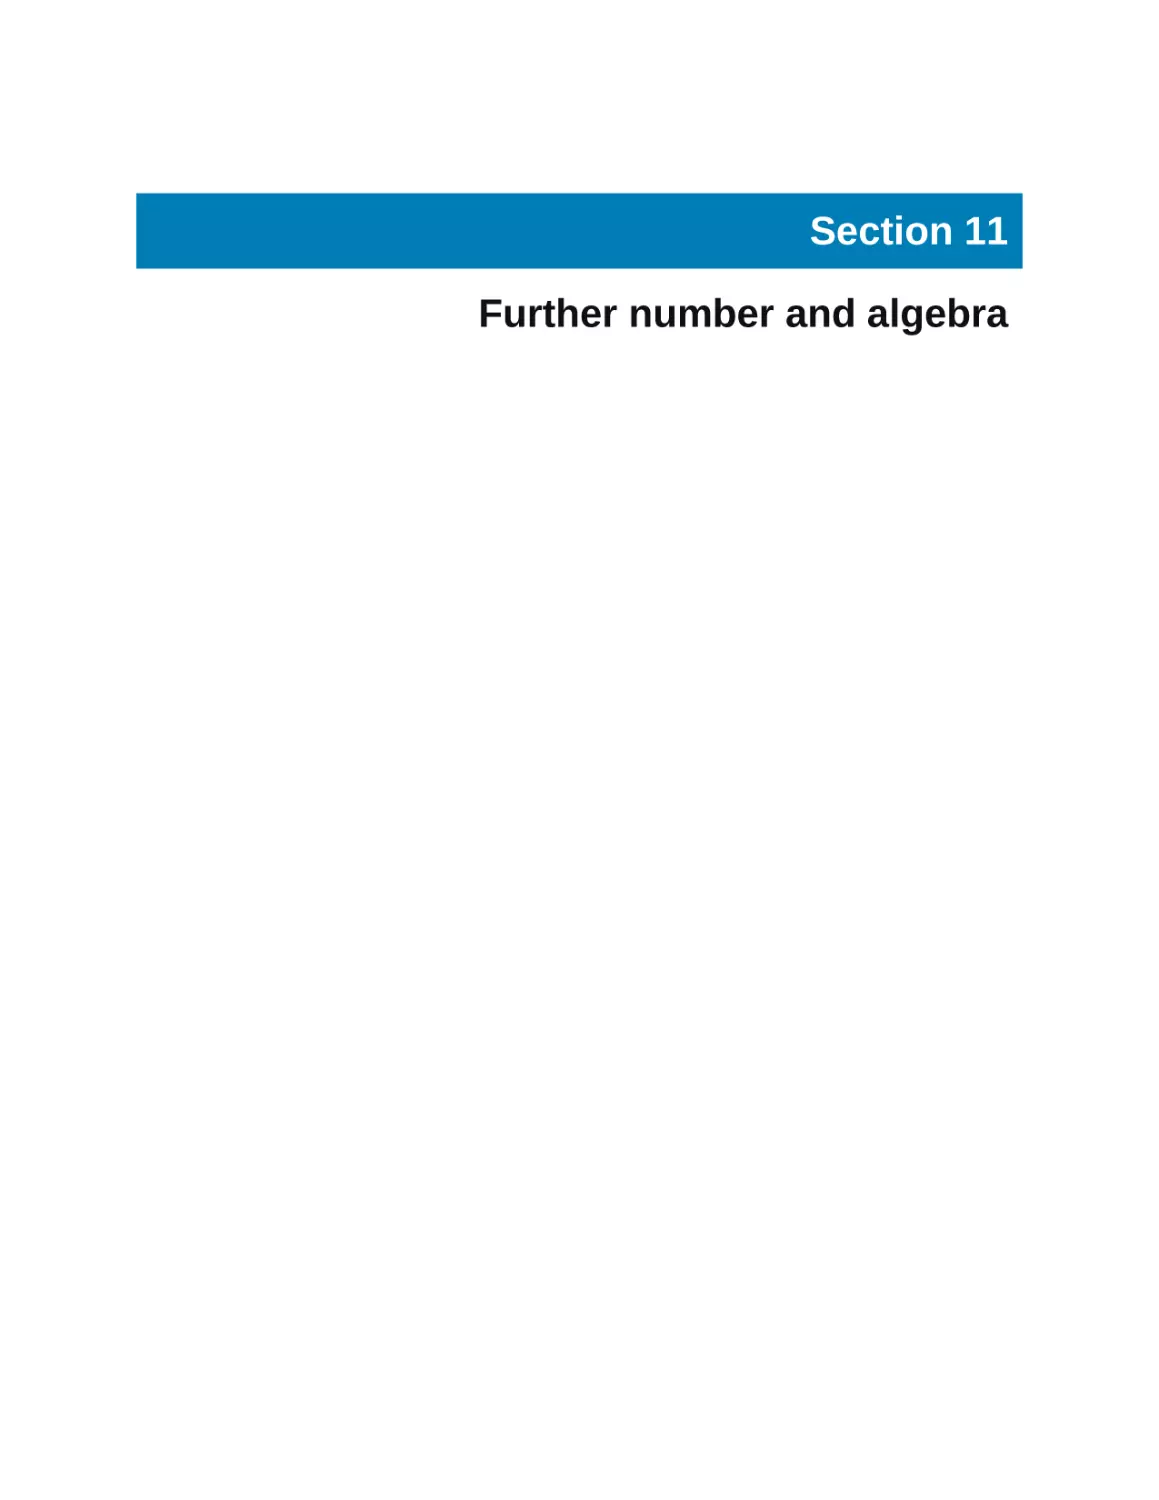 Section 11 Further number and algebra